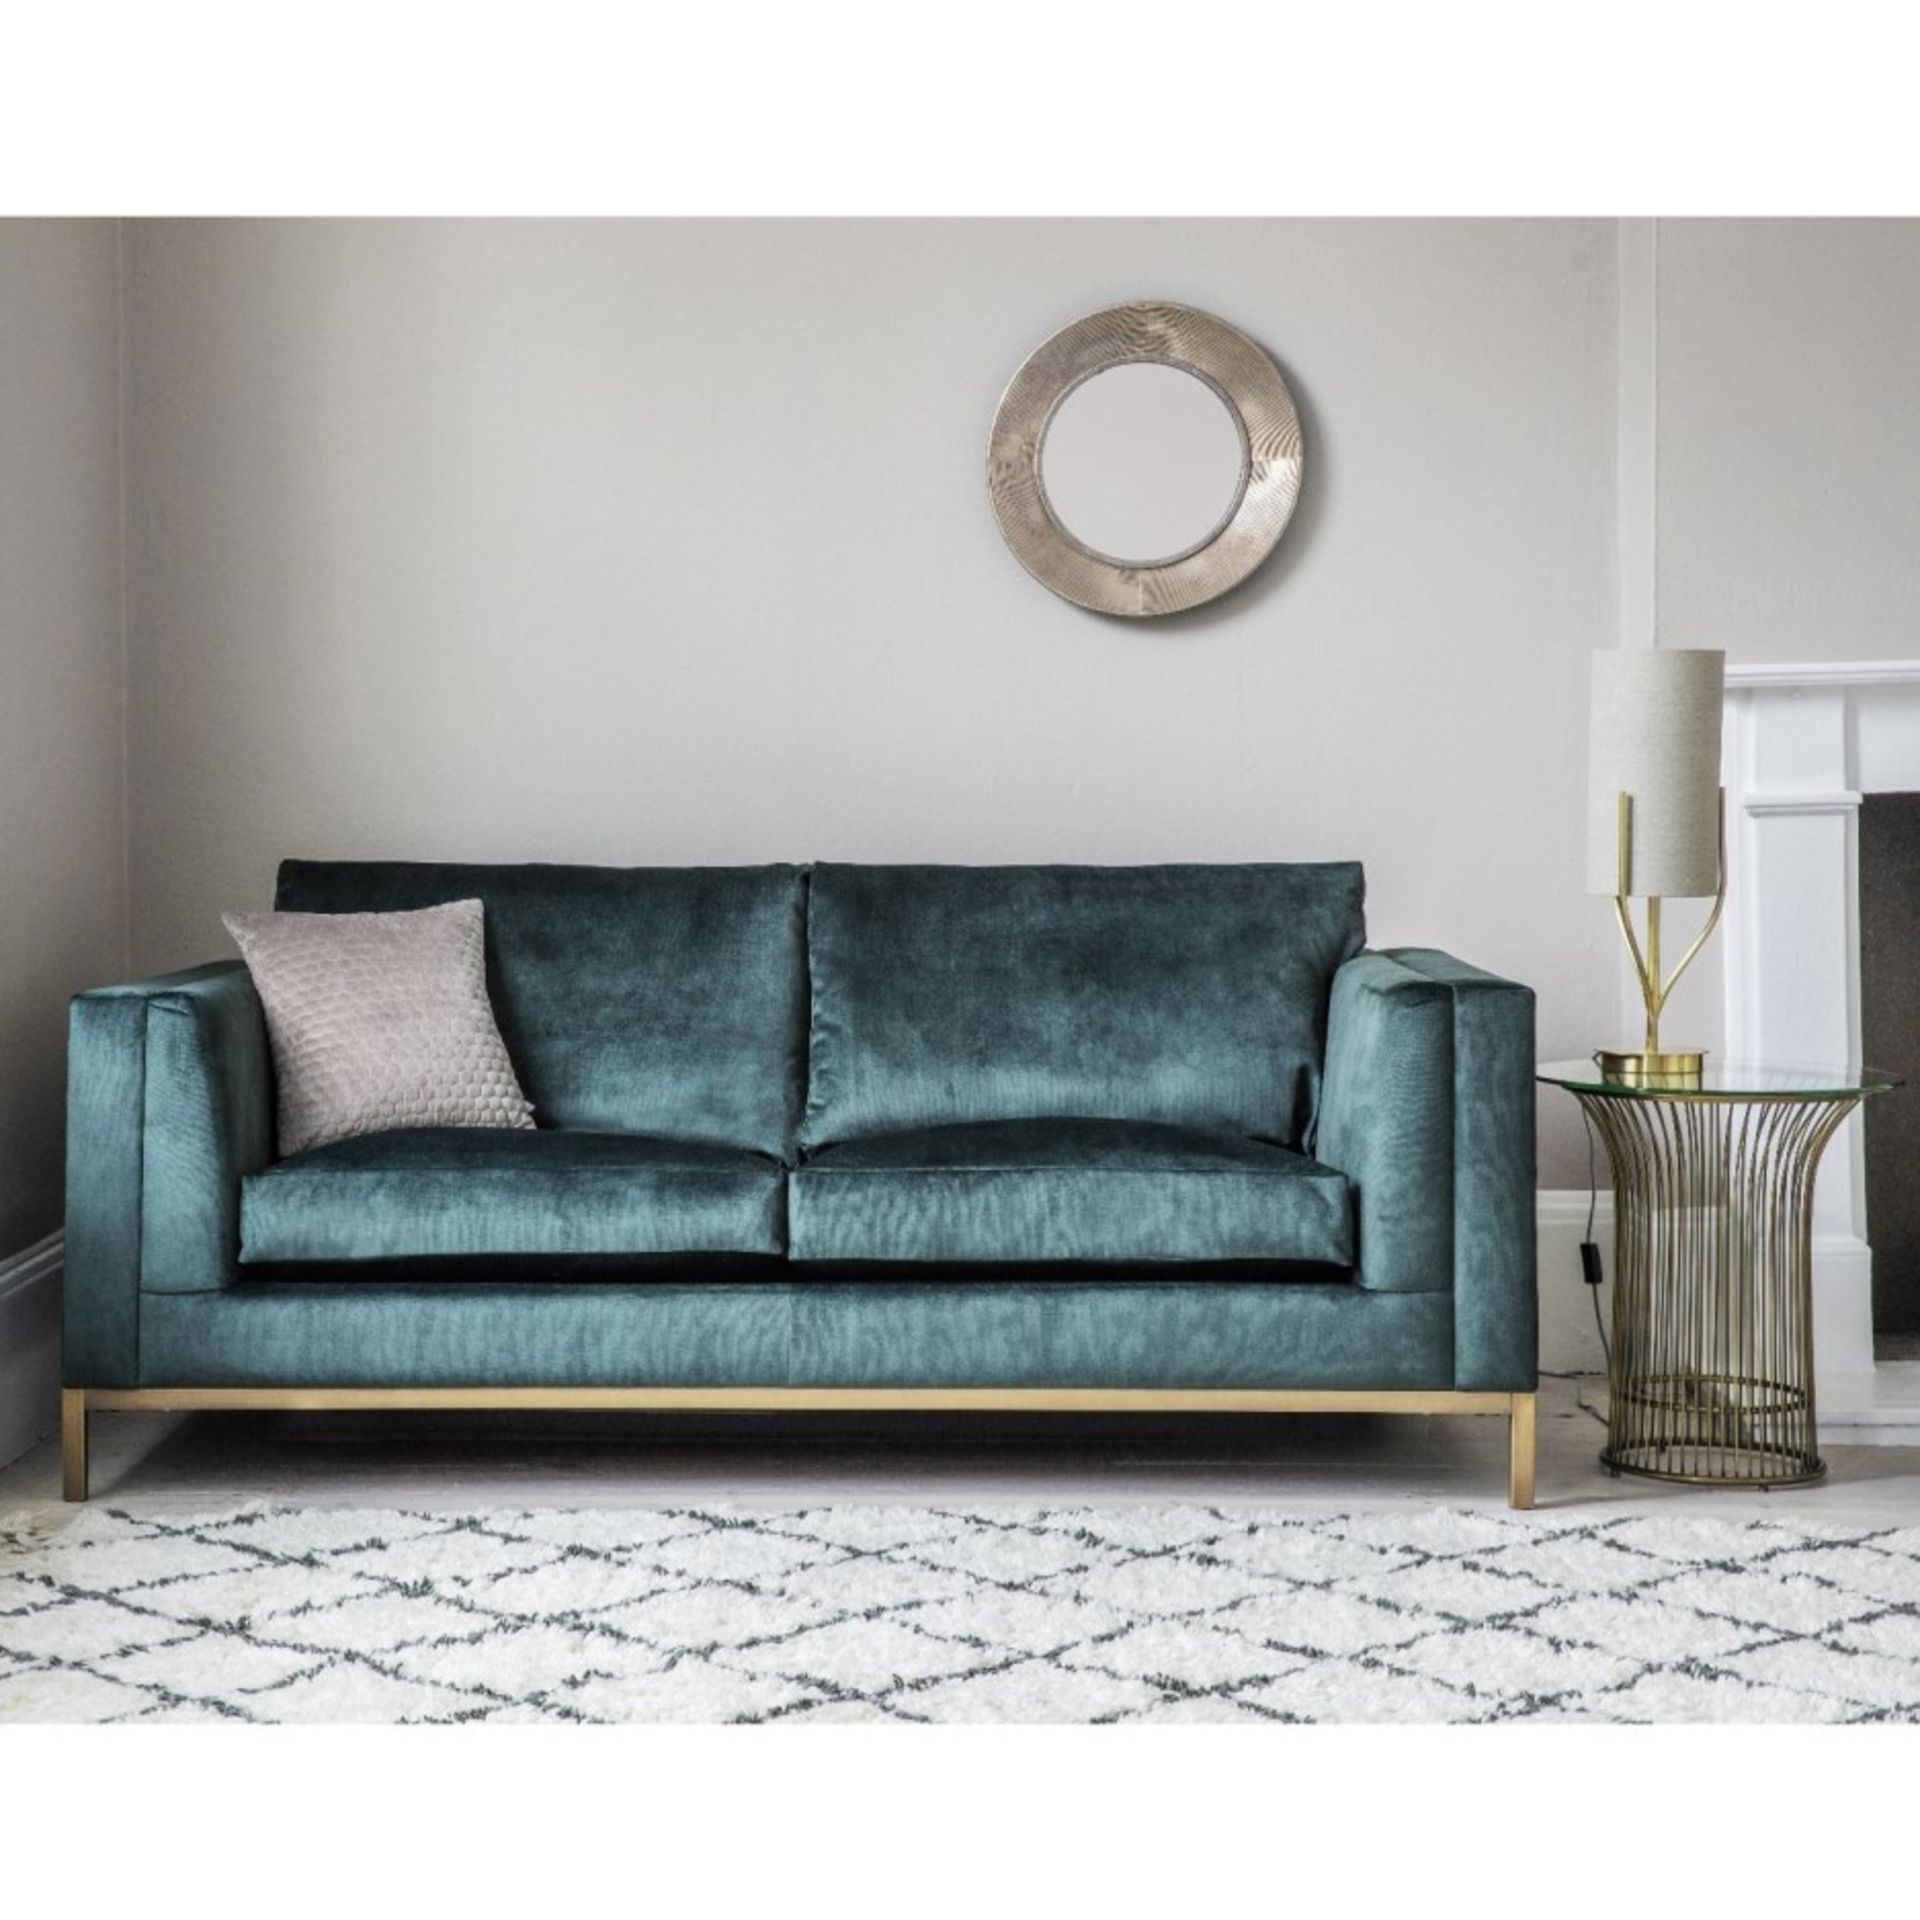 Treyford Sofa 3 Seater Longbridge Petrol The Treyford Collection Is One Our Most Impressive Sofa Bed